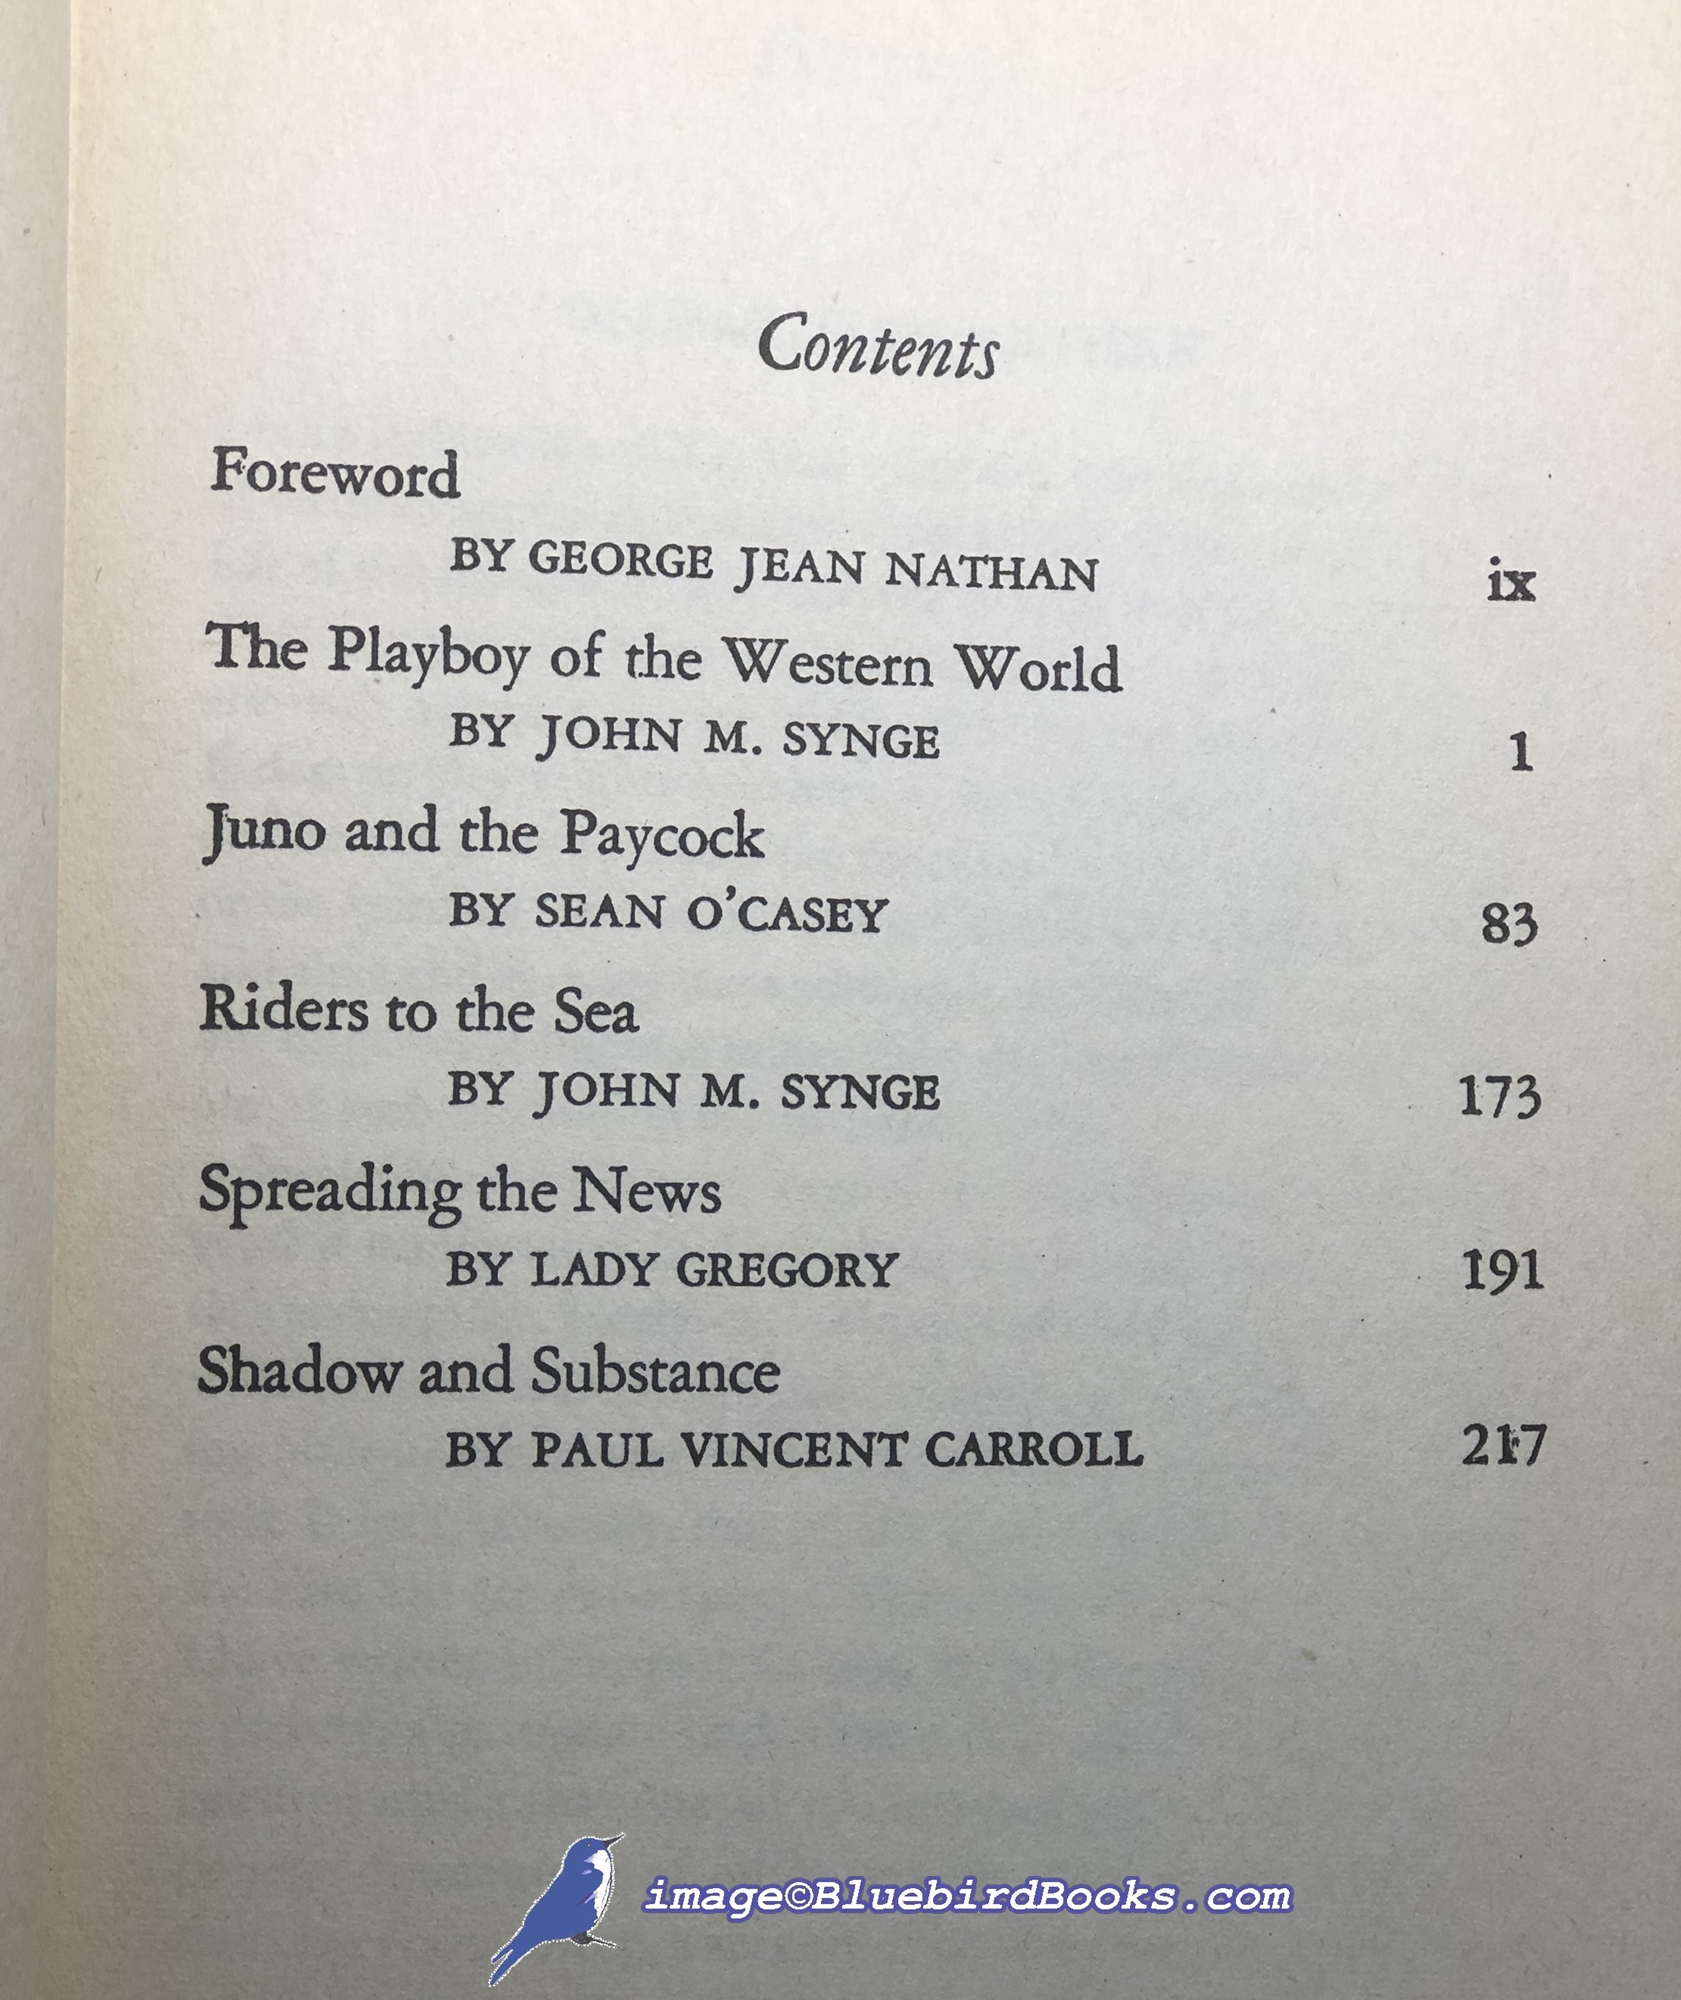 SYNGE, J.M.; O'CASEY, SEAN; LADY GREGORY; CARROLL, PAUL VINCENT - Five Great Modern Irish Plays, the Complete Texts (Modern Library #30. 3)